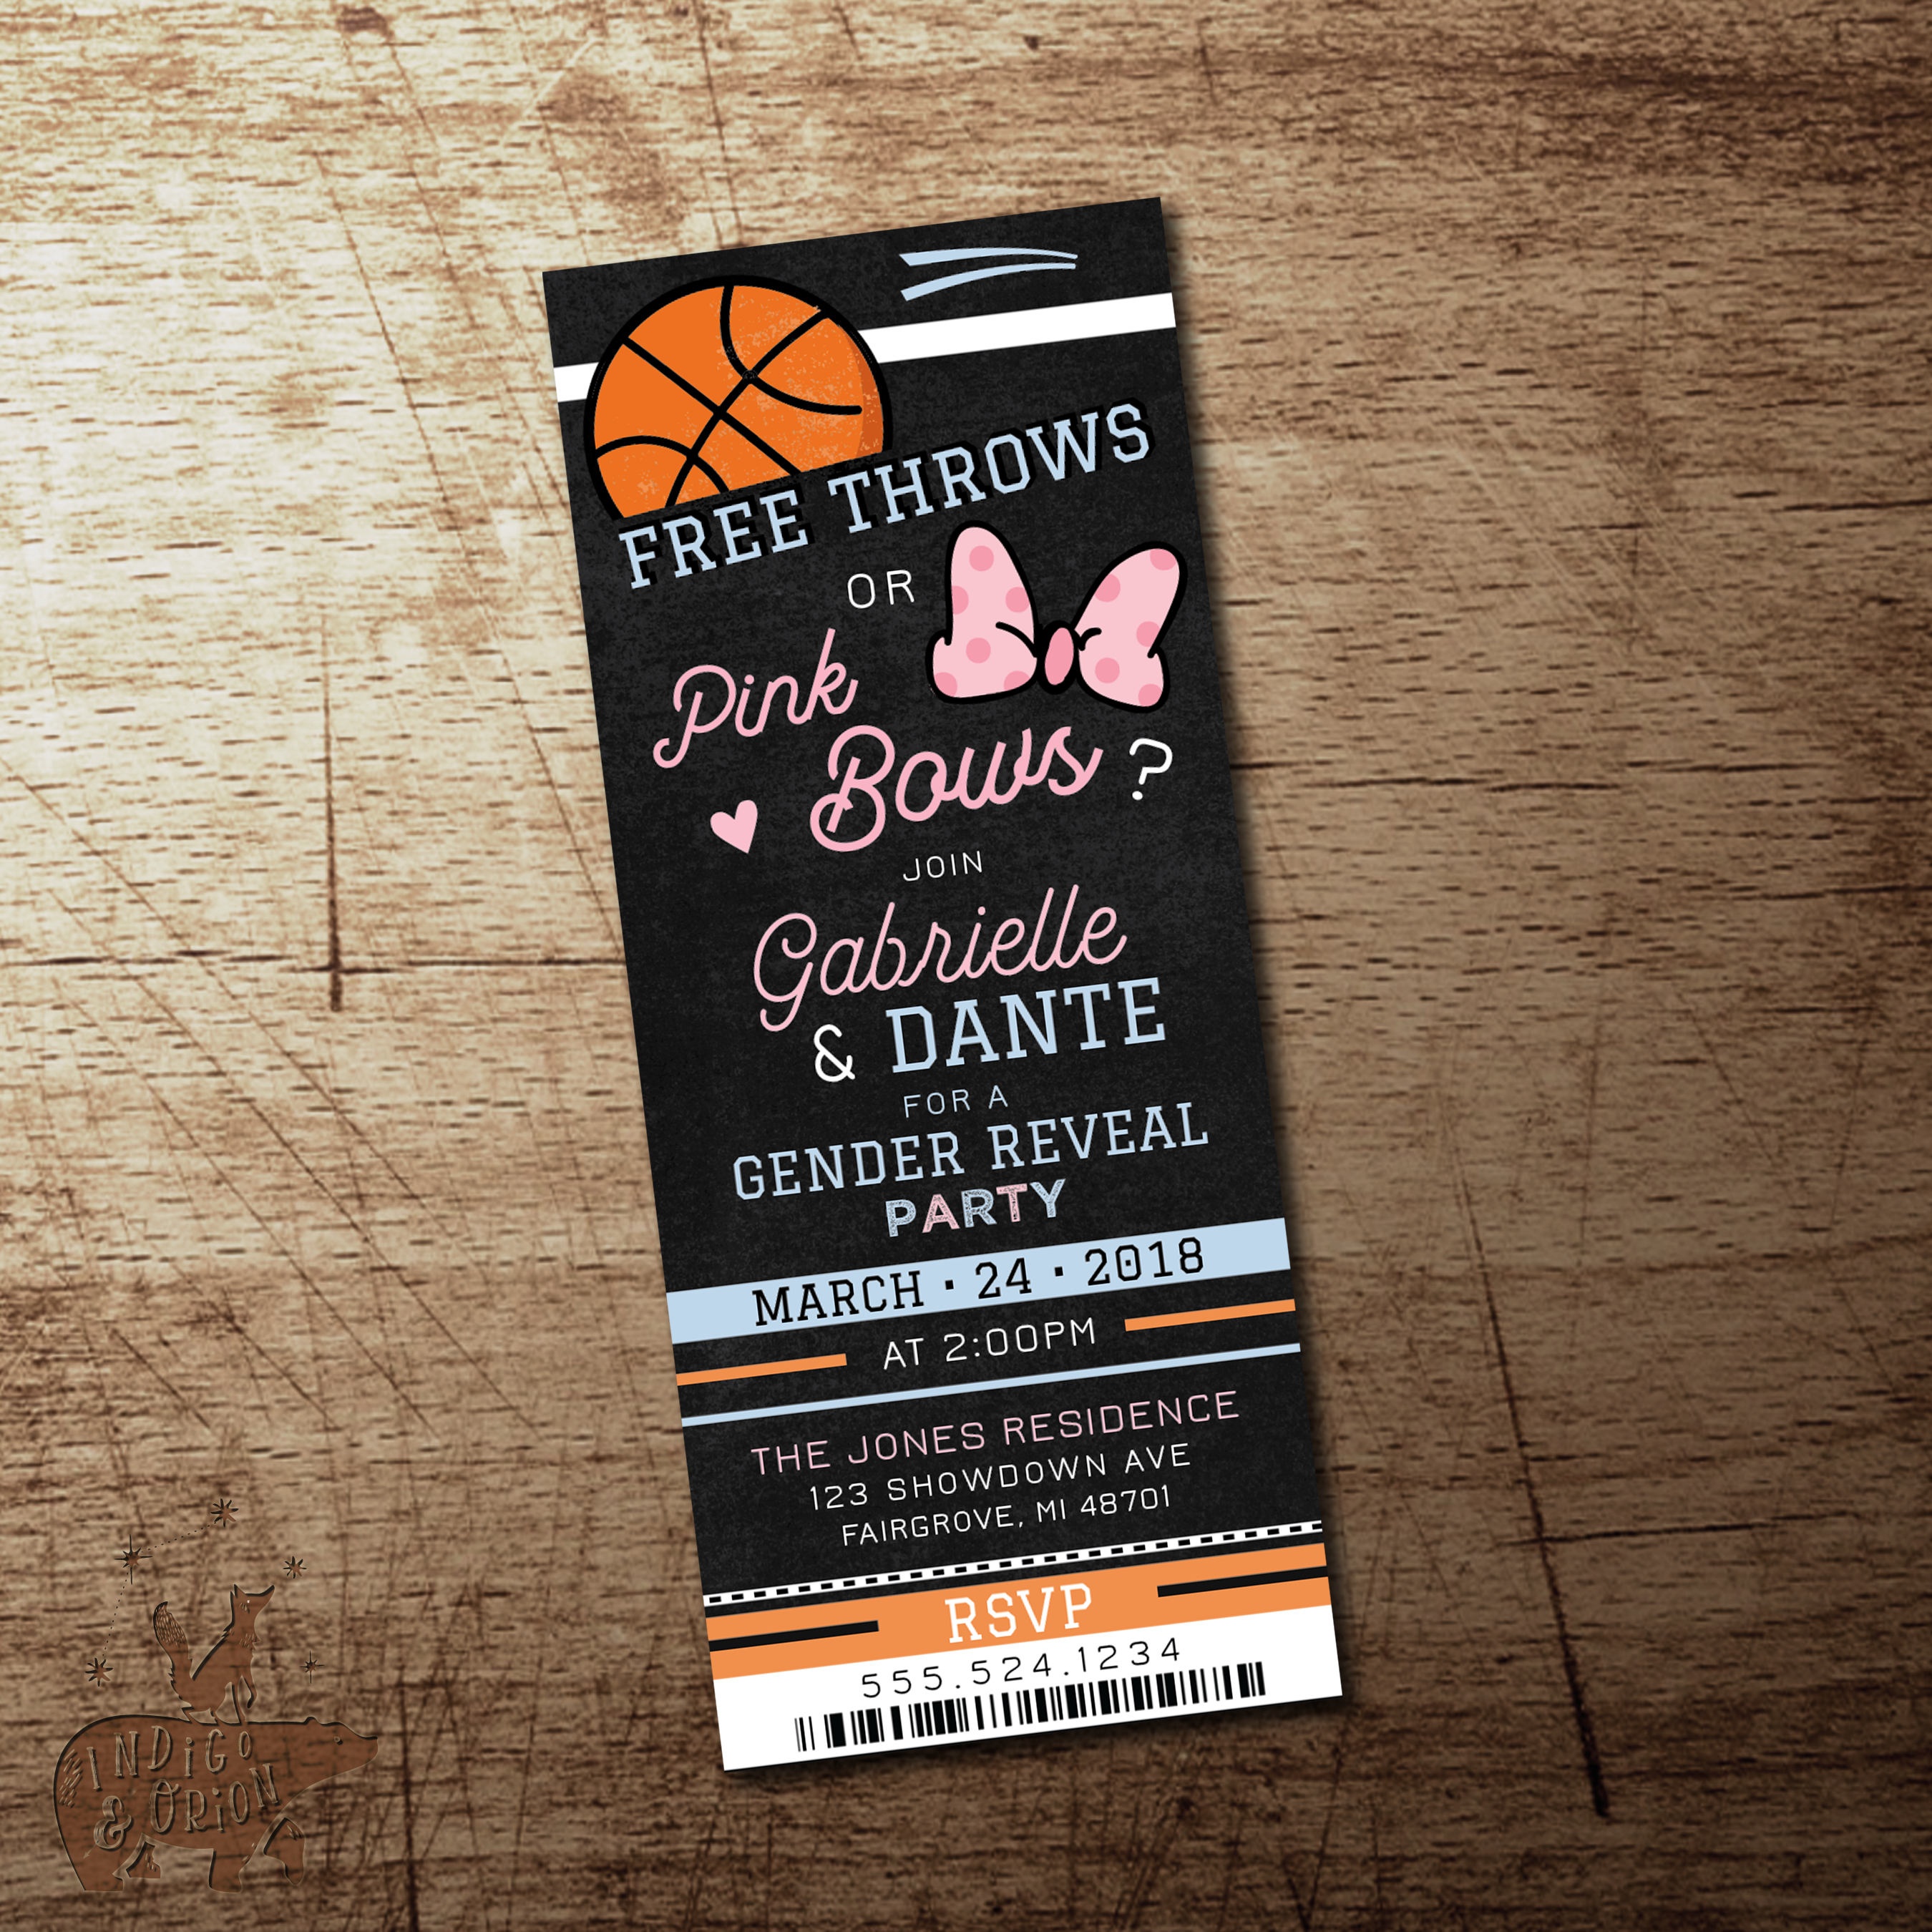 Basketball Gender Reveal Invitation Free Throws Or Pink Bows | Etsy - Free Printable Gender Reveal Invitations